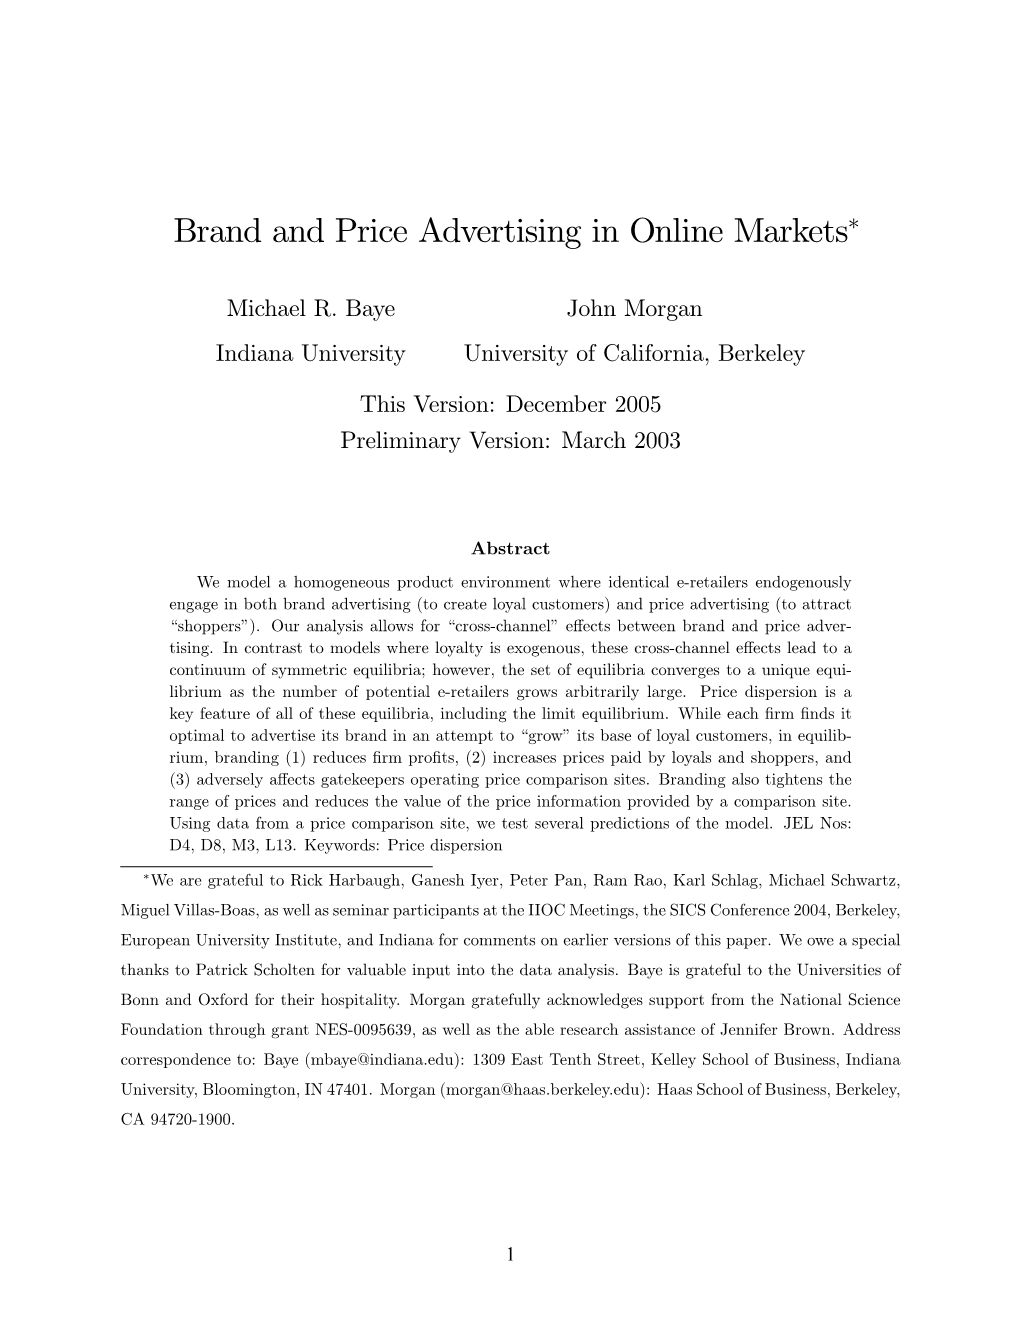 Brand and Price Advertising in Online Markets"